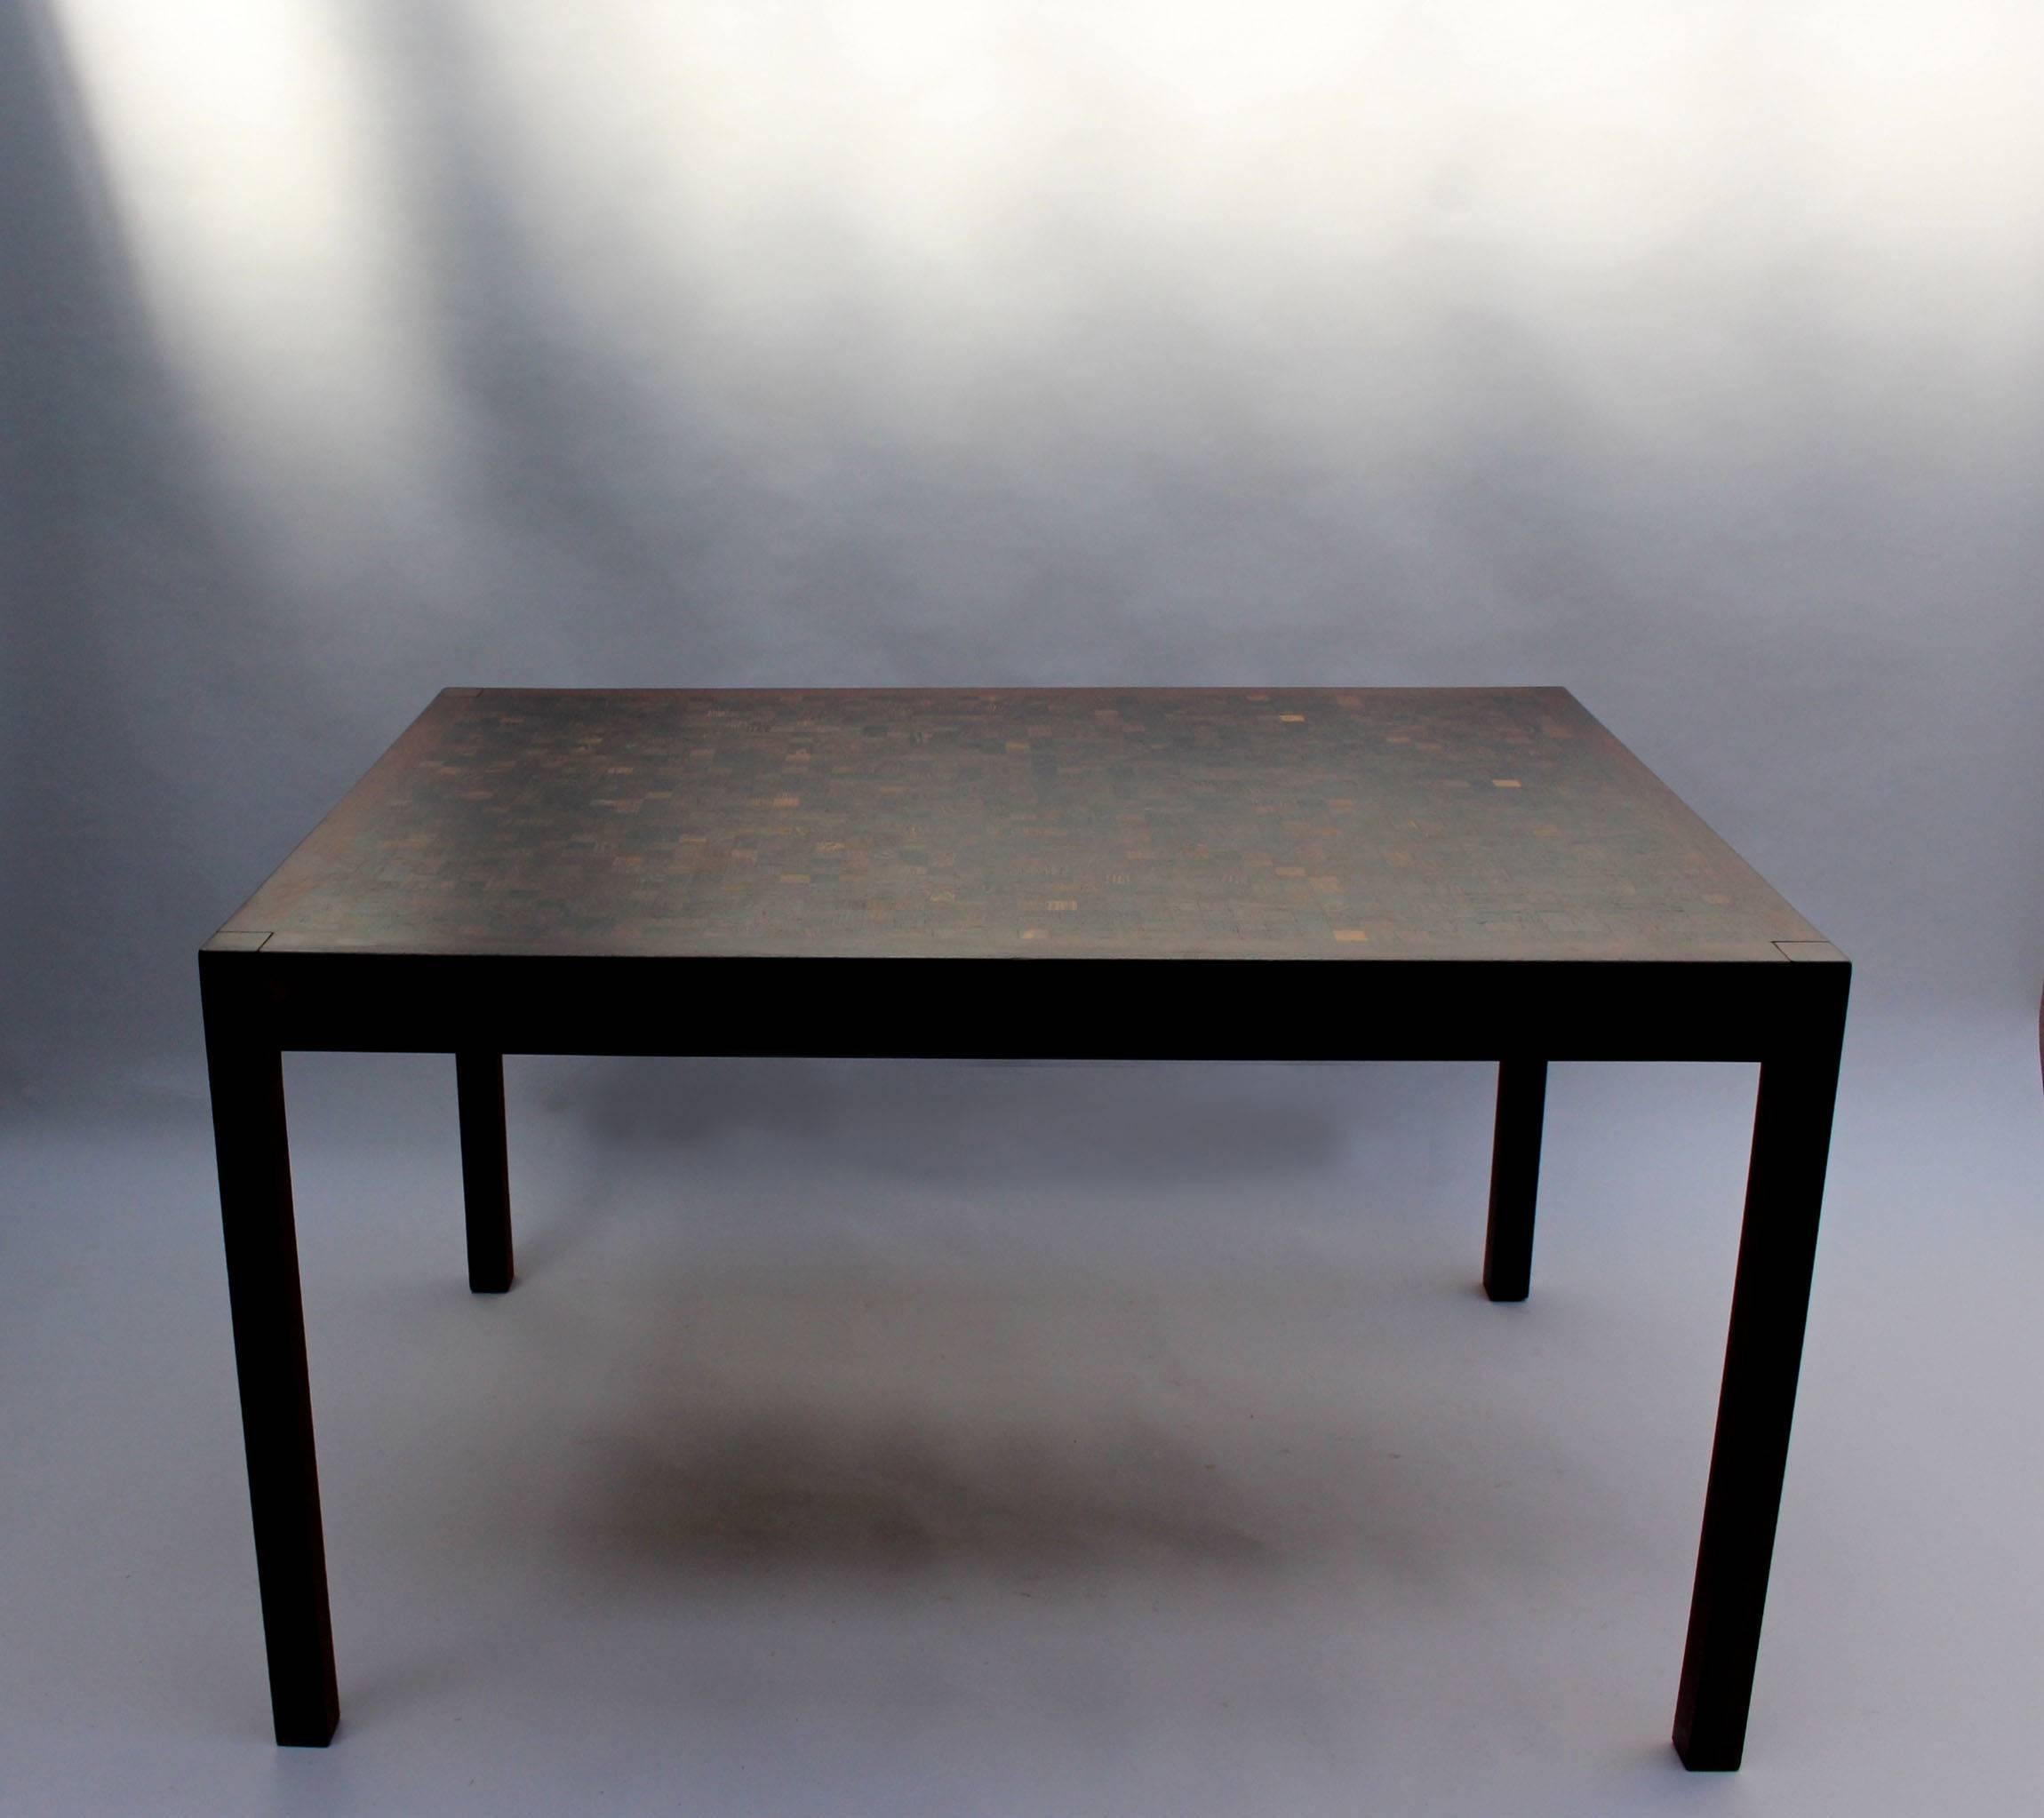 A 1960s Swiss dining table in wenge wood by Dieter Waeckerlin with inlay pattern,
two end leaves and chrome details.